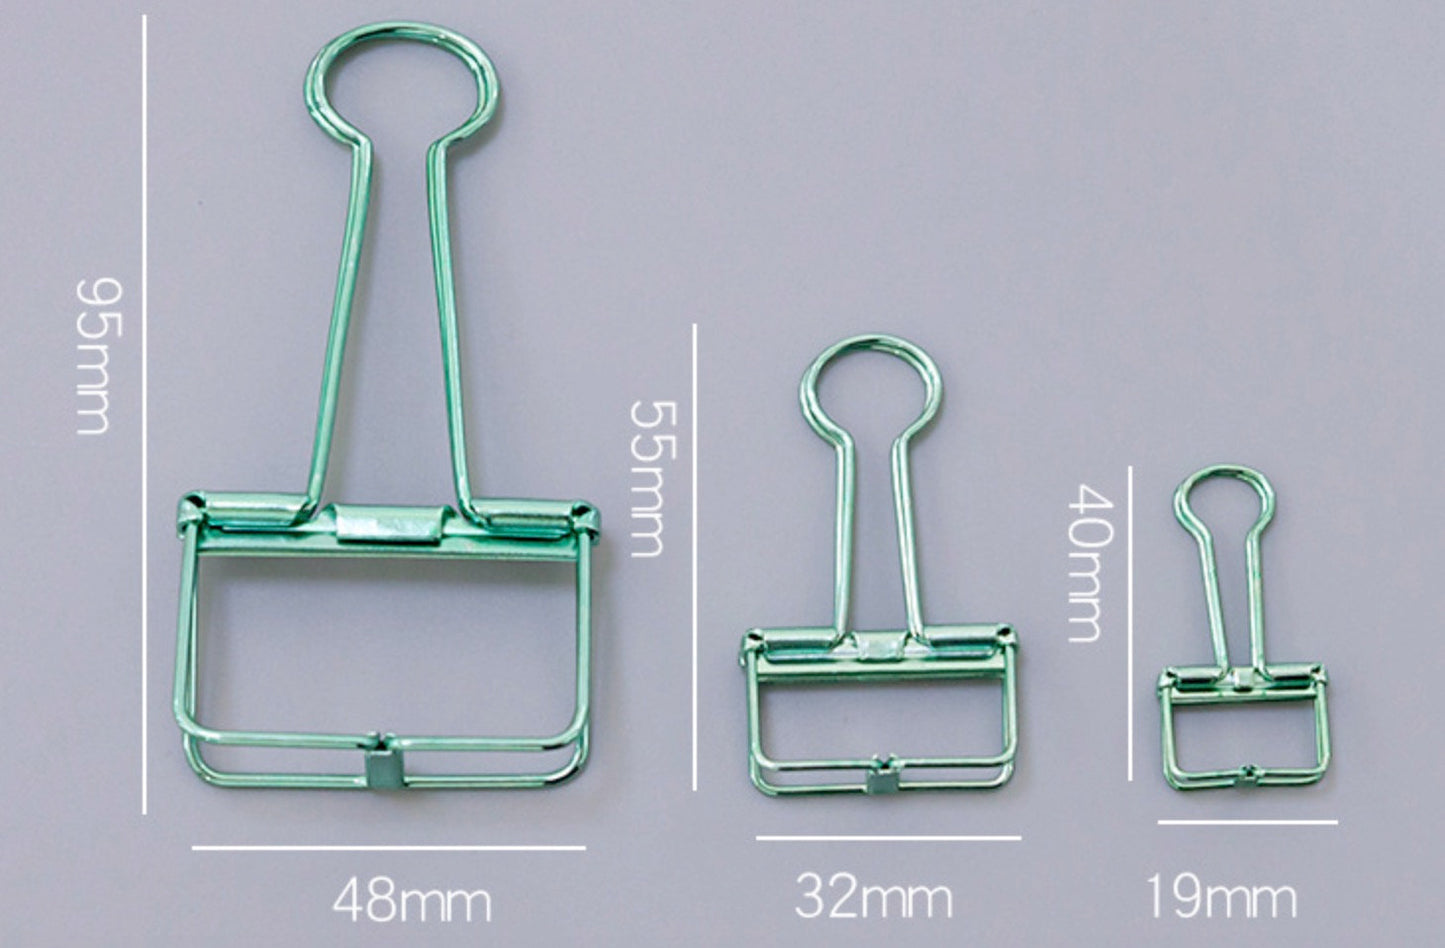 Shown three different sizes of metallic paper clips, from left to right, large (95mm *48mm), Medium (55mm *32mm), Small (40mm *19mm) 